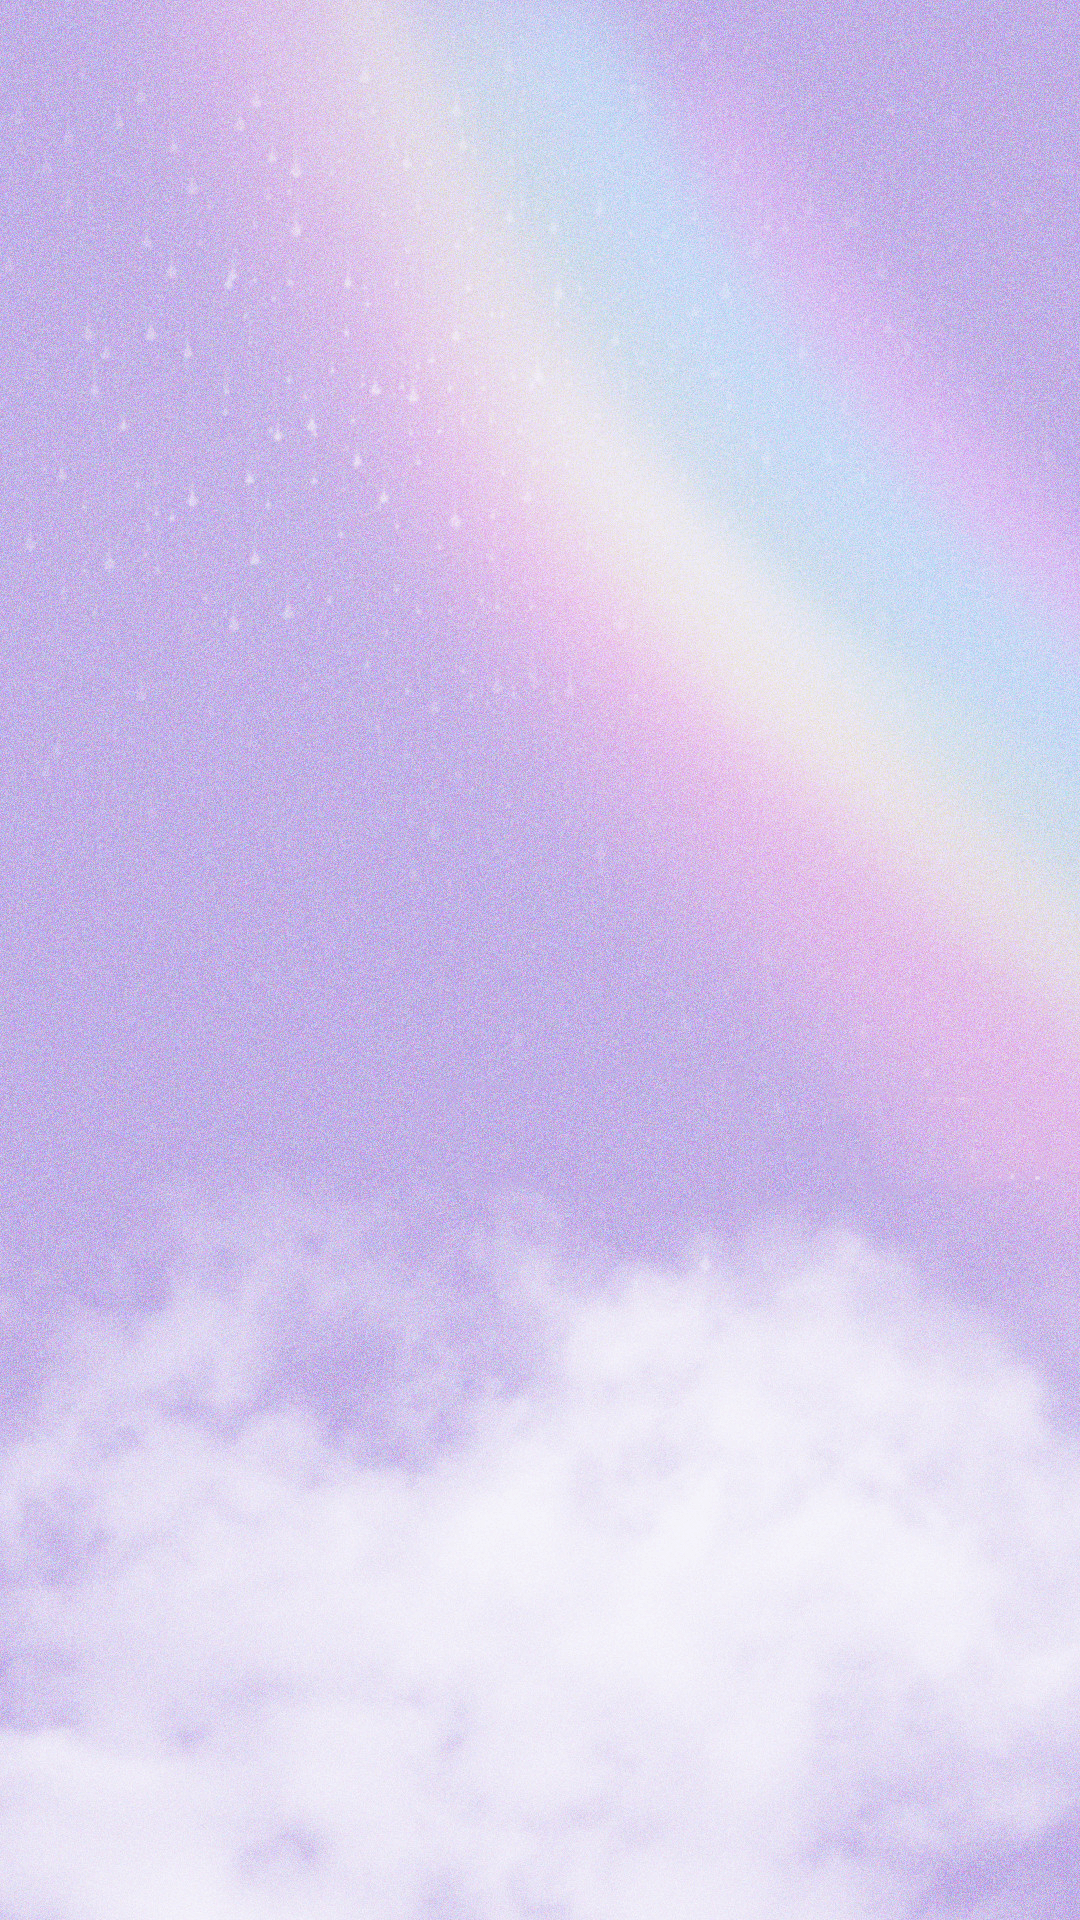 Aesthetic wallpaper with a purple and pink gradient and clouds - Pastel rainbow